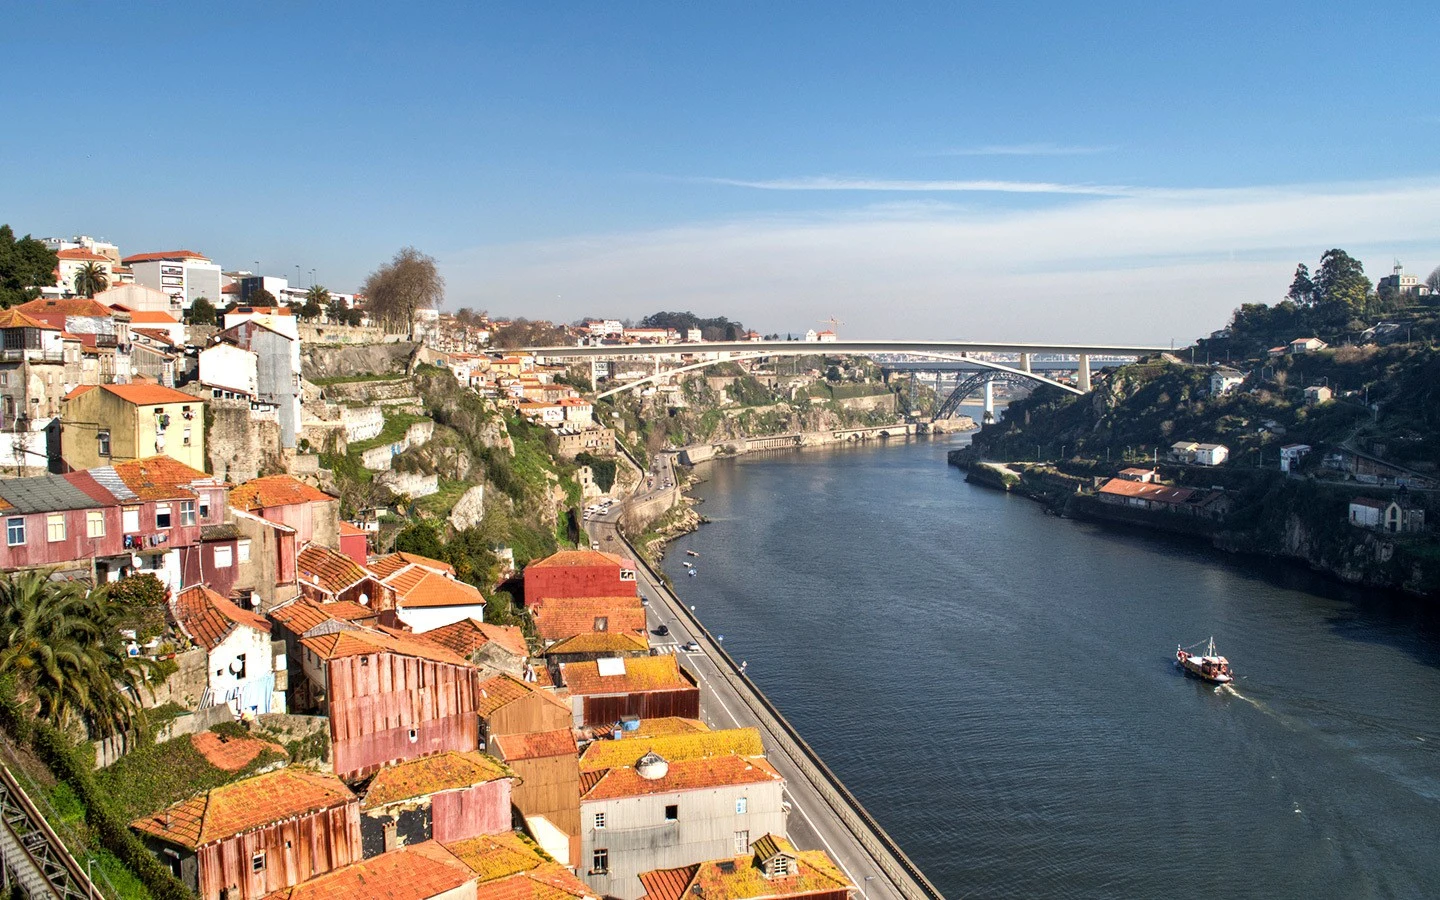 Views from the The Dom Luís bridge in Porto, Portugal